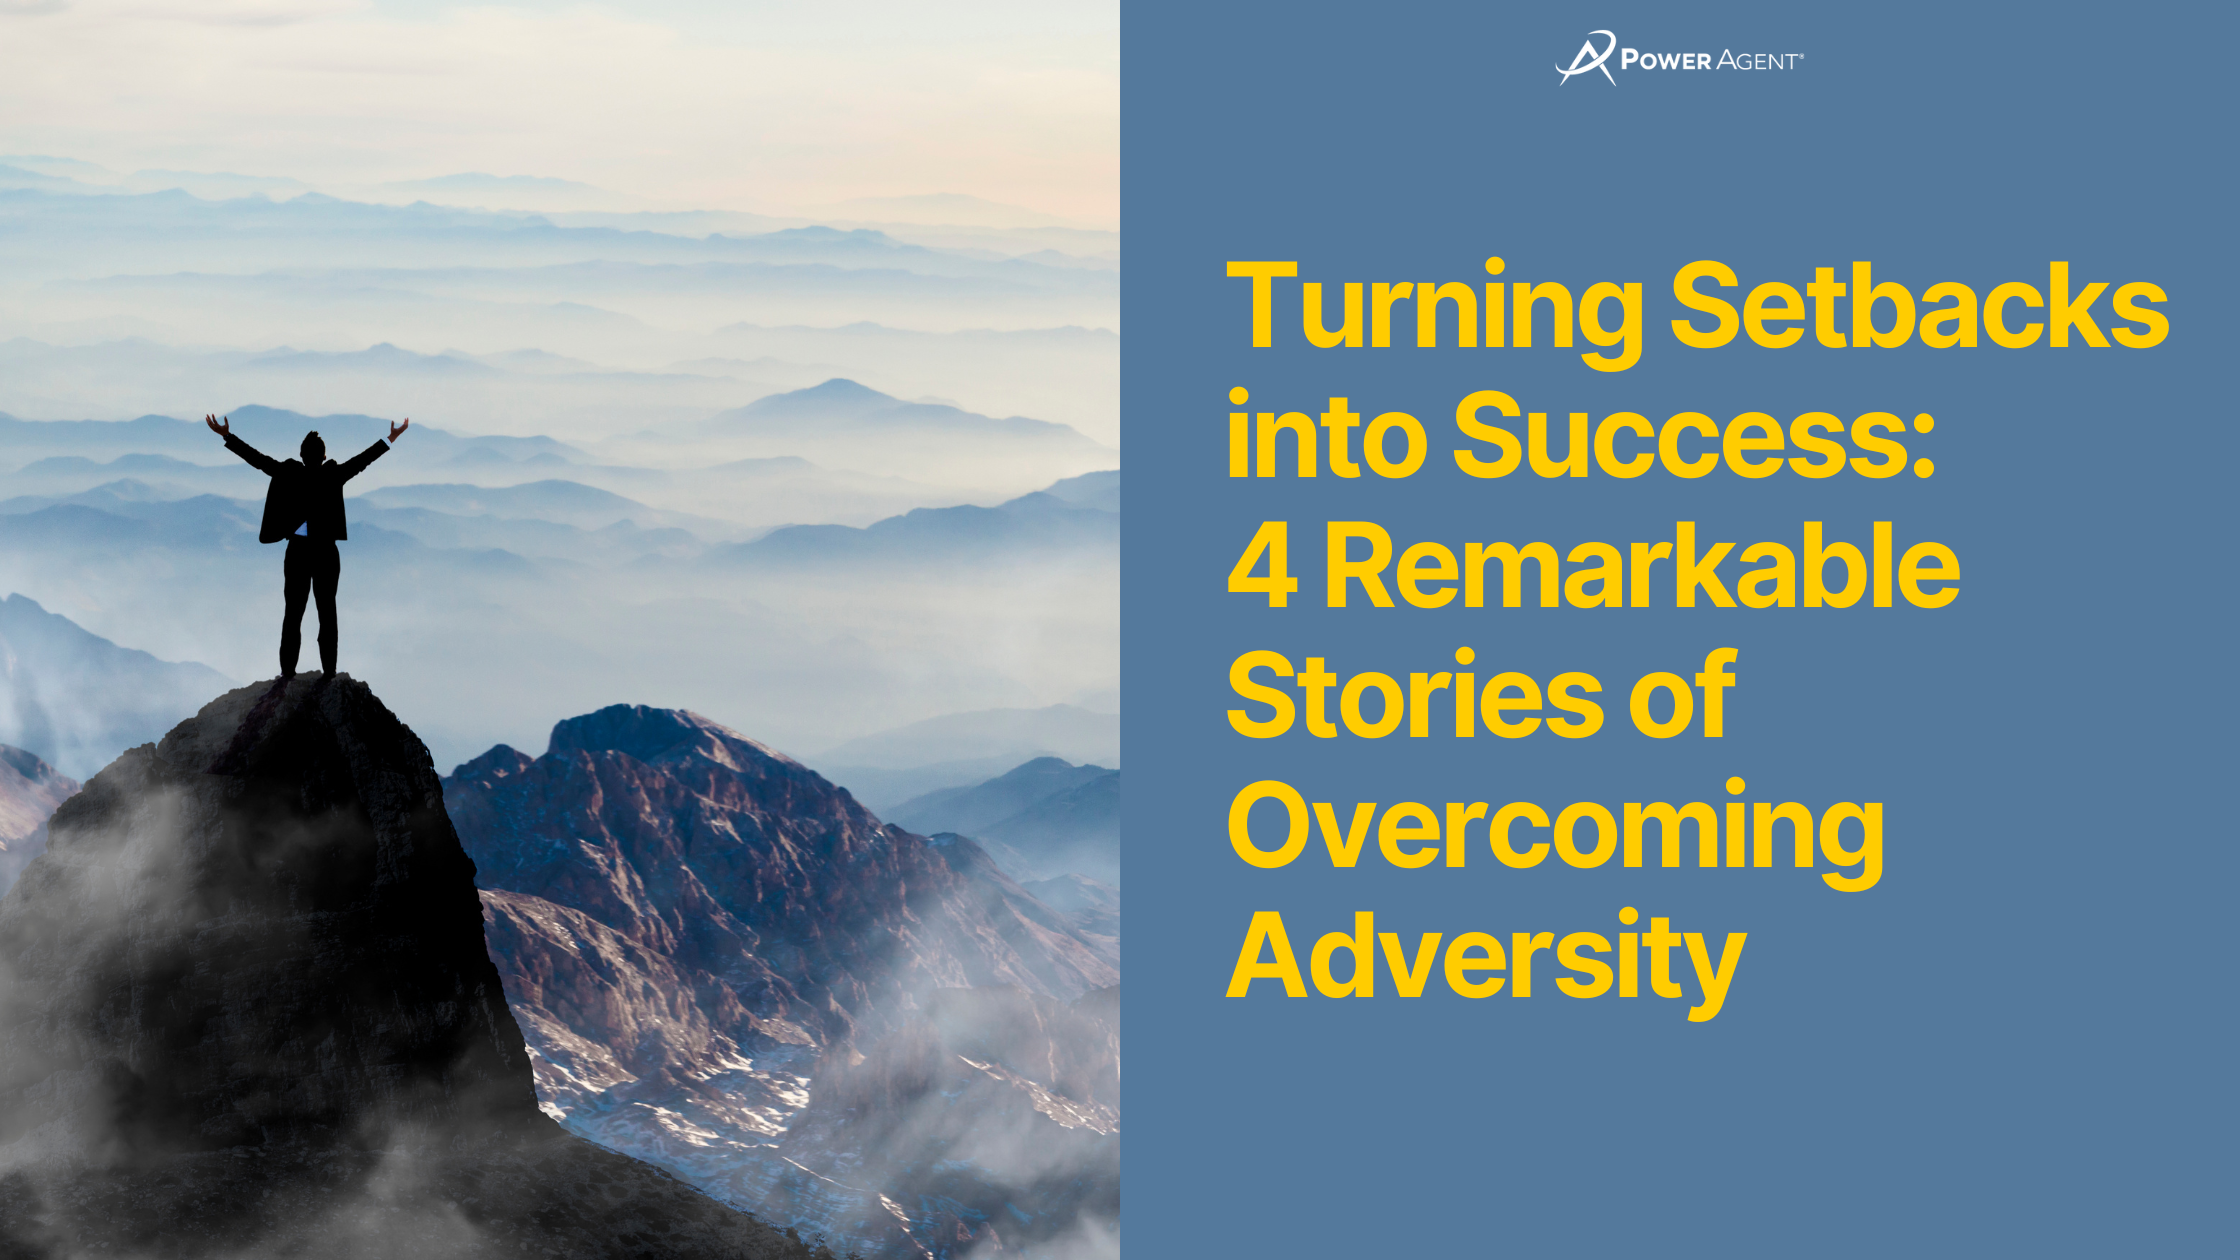 4 Remarkable Stories of Overcoming Adversity